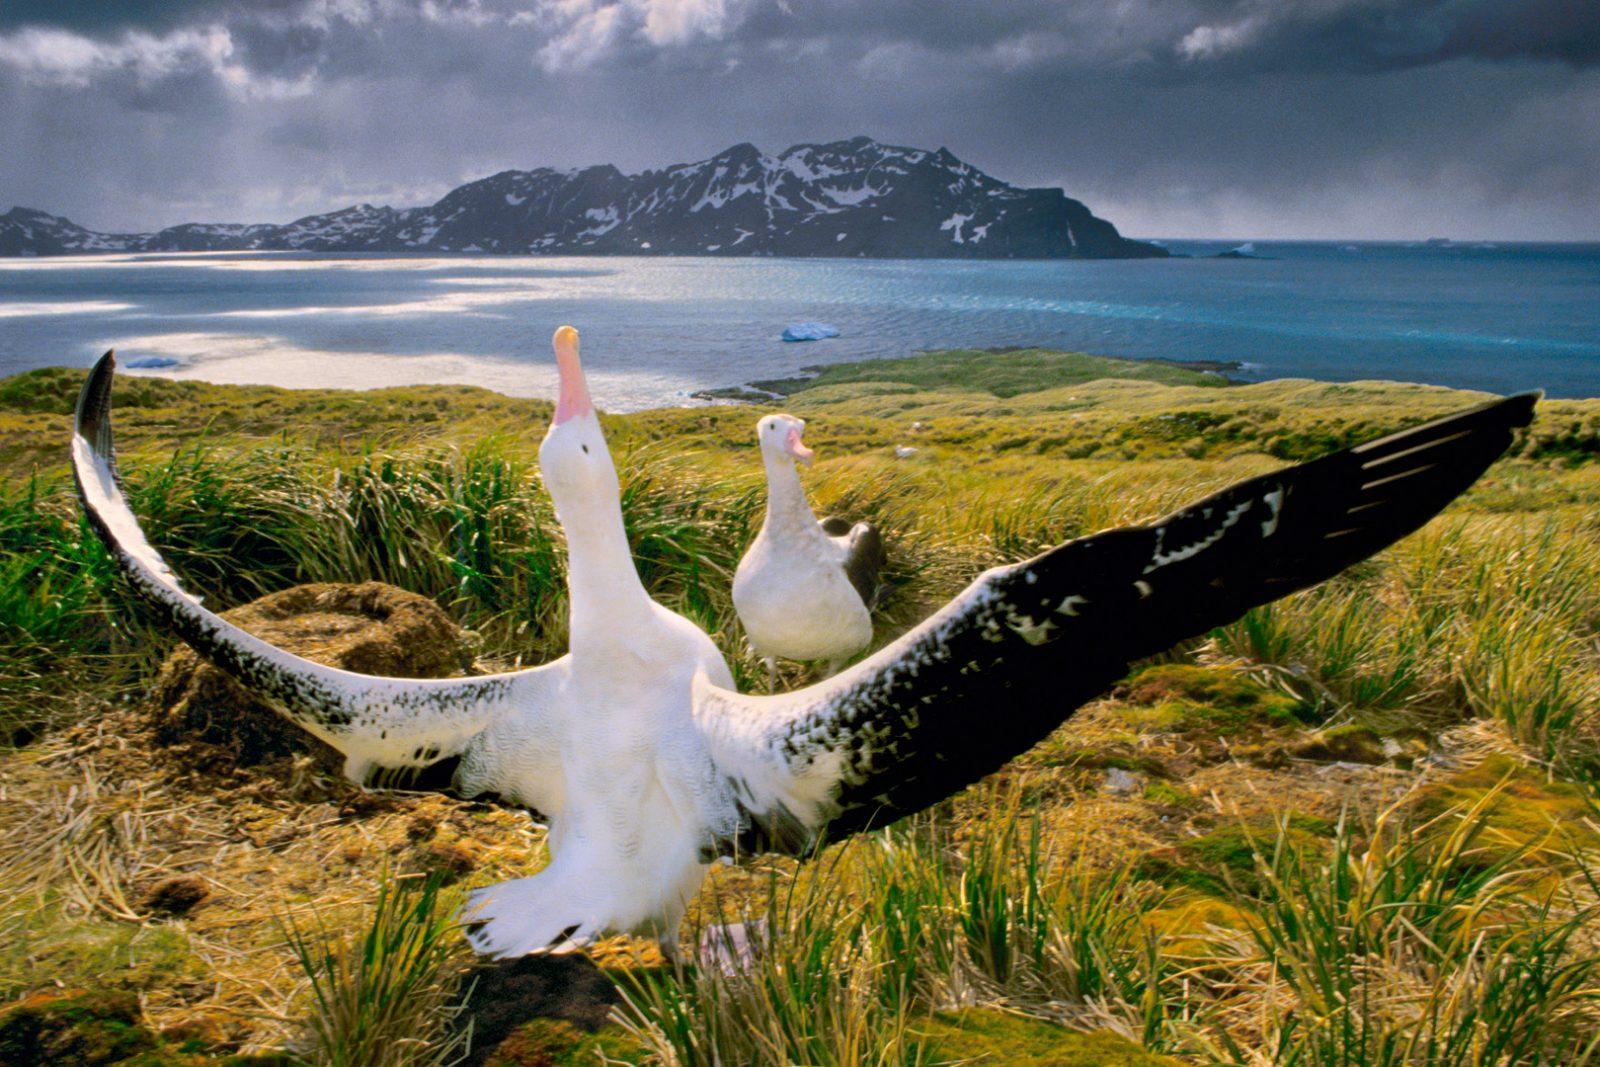 Wandering albatrosses courting, Diomedea exulans, South Georgia Island